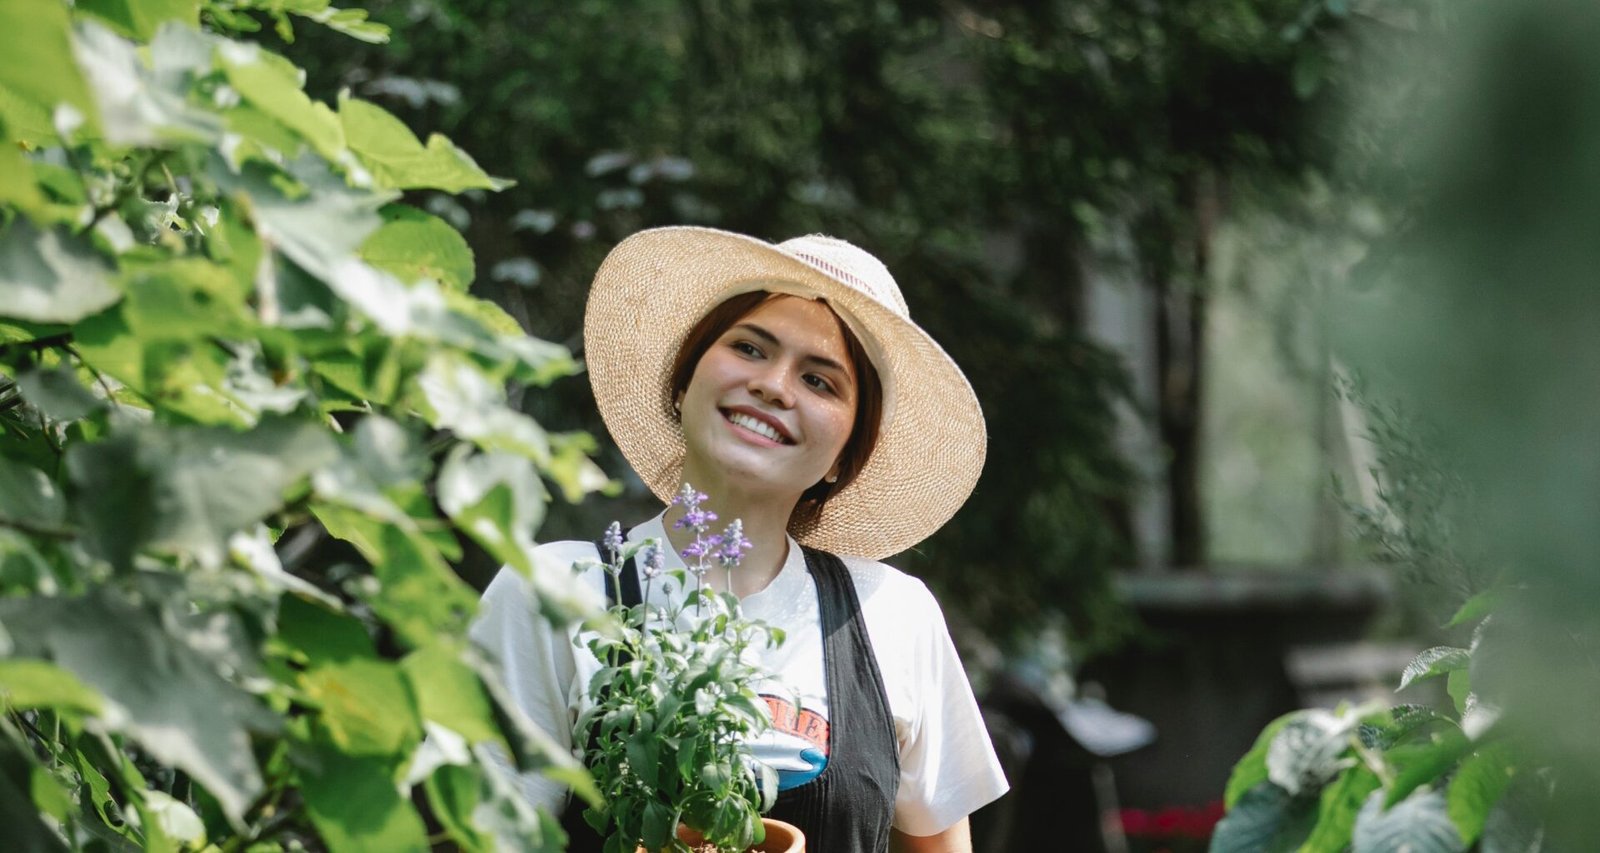 Promoting an eco-friendly lifestyle: An ethnic woman carrying a flowerpot, ready to nurture nature. Reflecting sustainable living in 2023 guide.